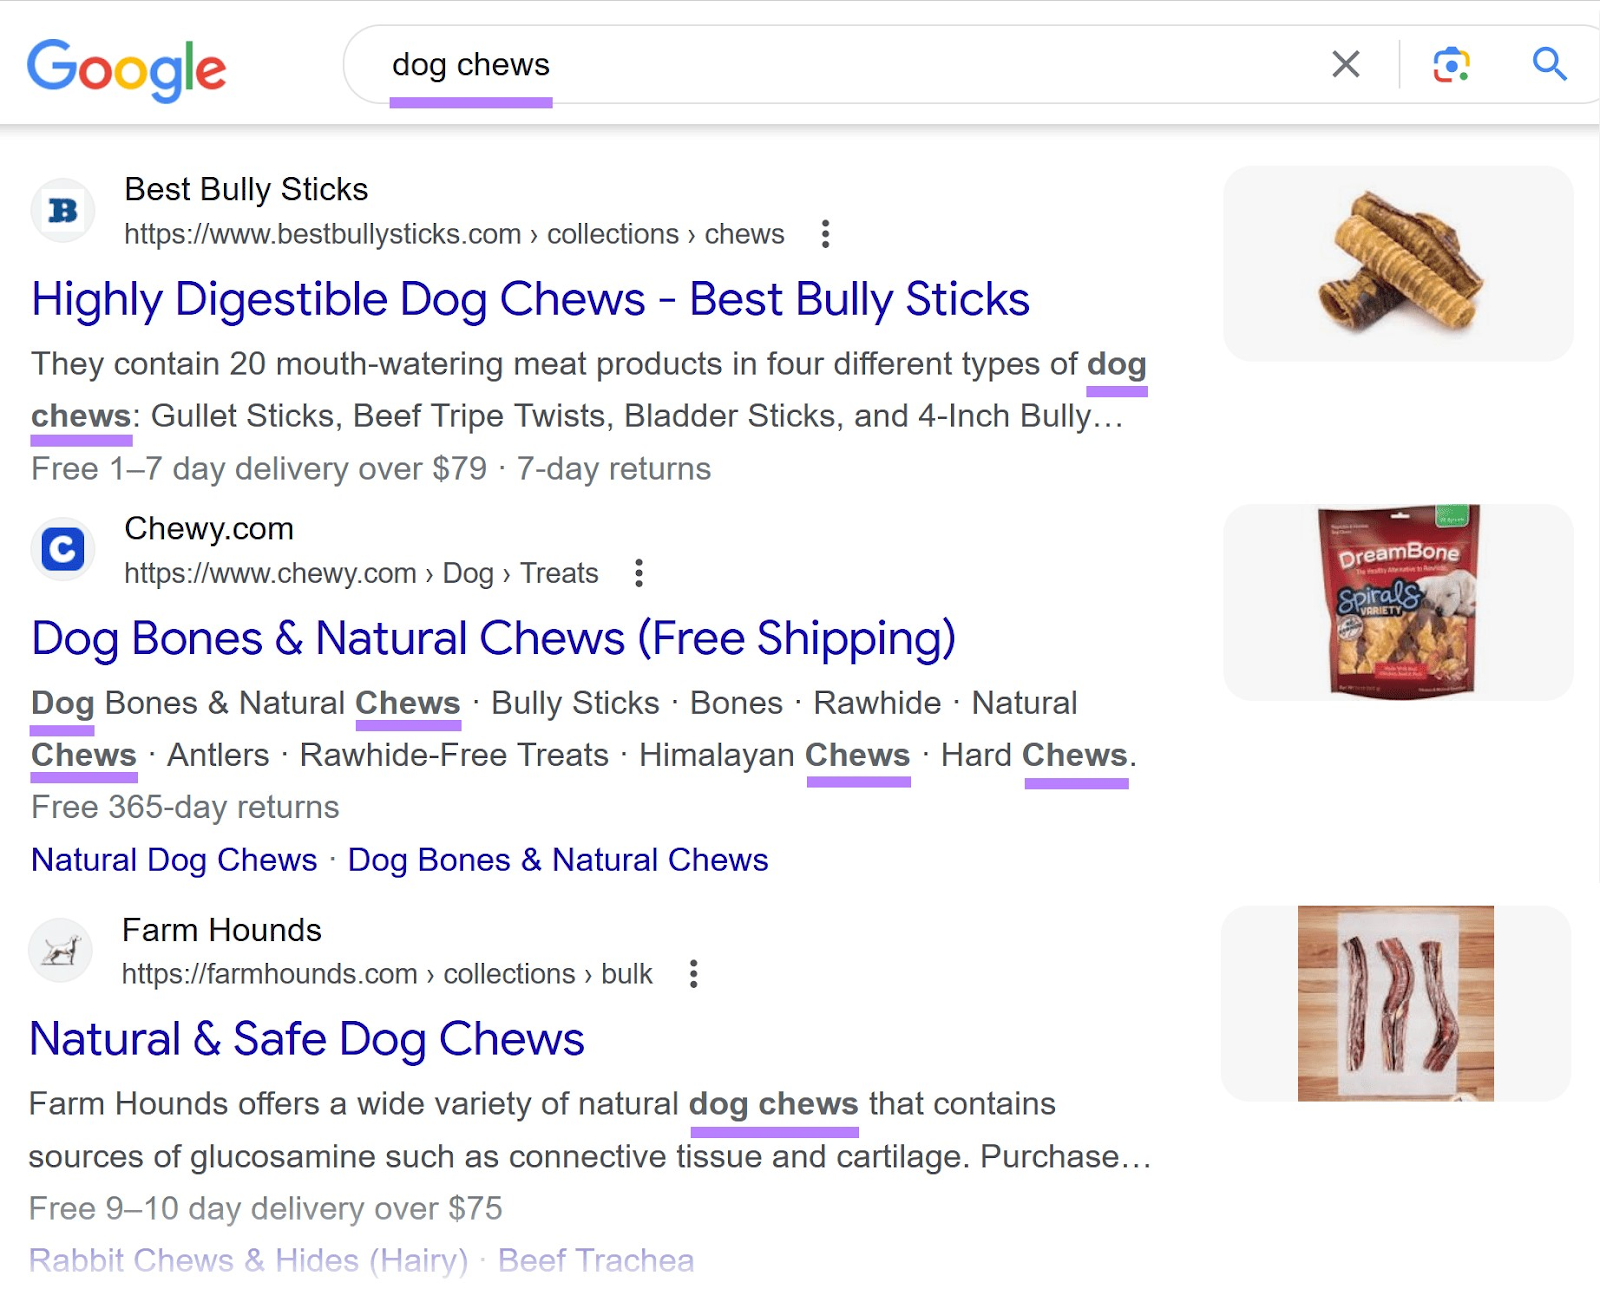 Google search results for “dog chews” with keywords highlighted